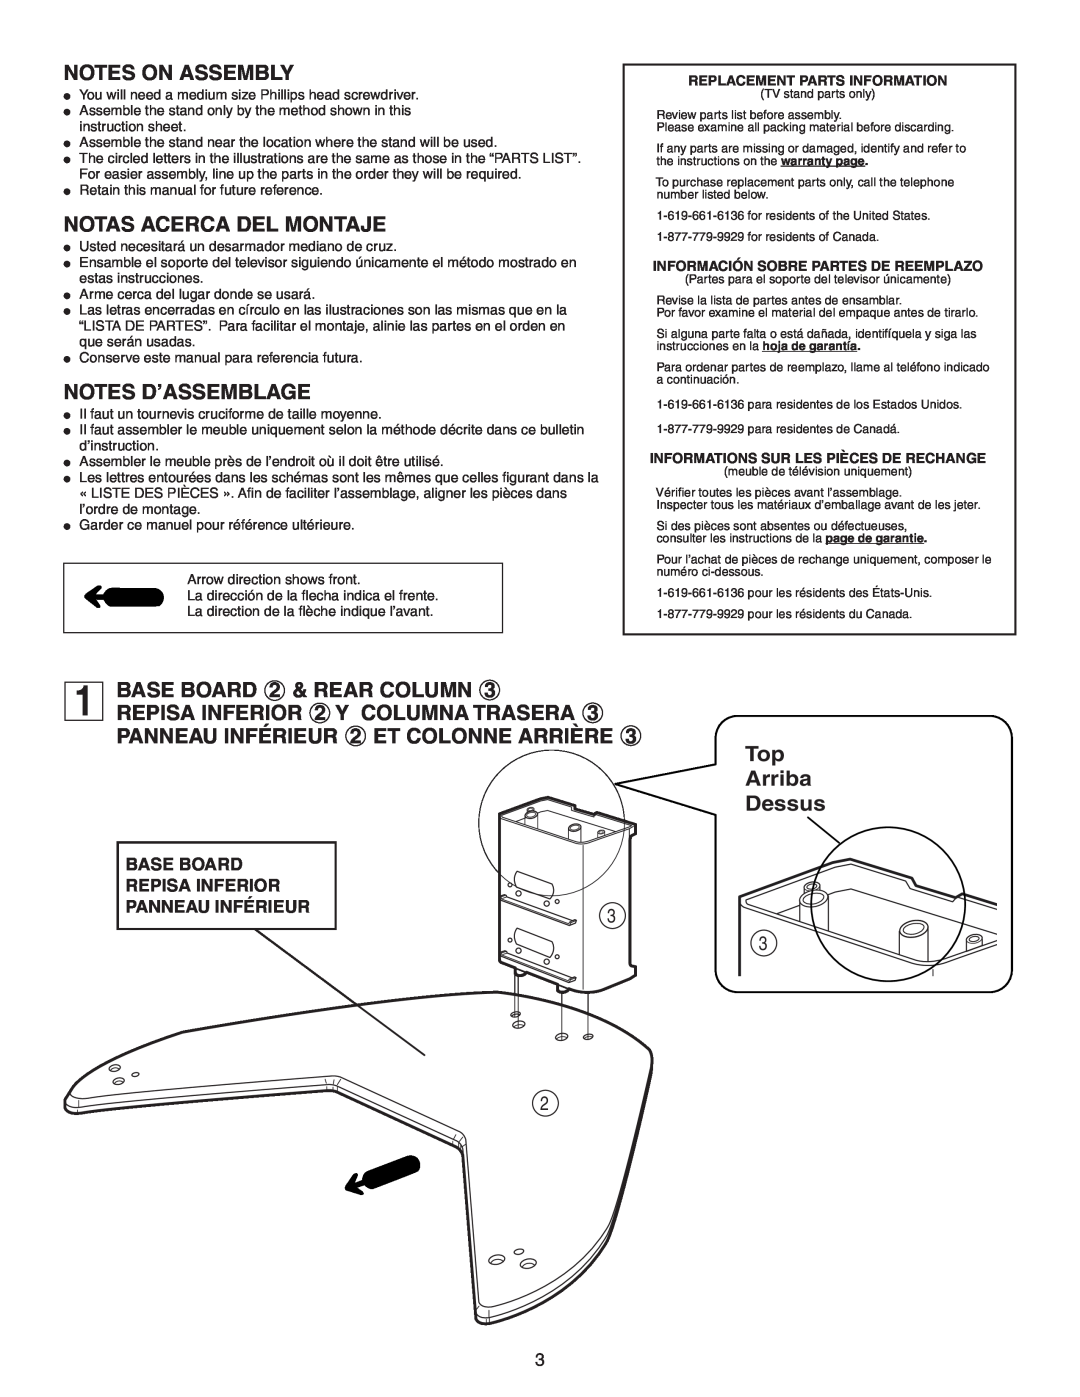 Sony SU-27HX1 manual Notes On Assembly, Notas Acerca Del Montaje, Notes D’Assemblage, BASE BOARD 2 & REAR COLUMN, Dessus 